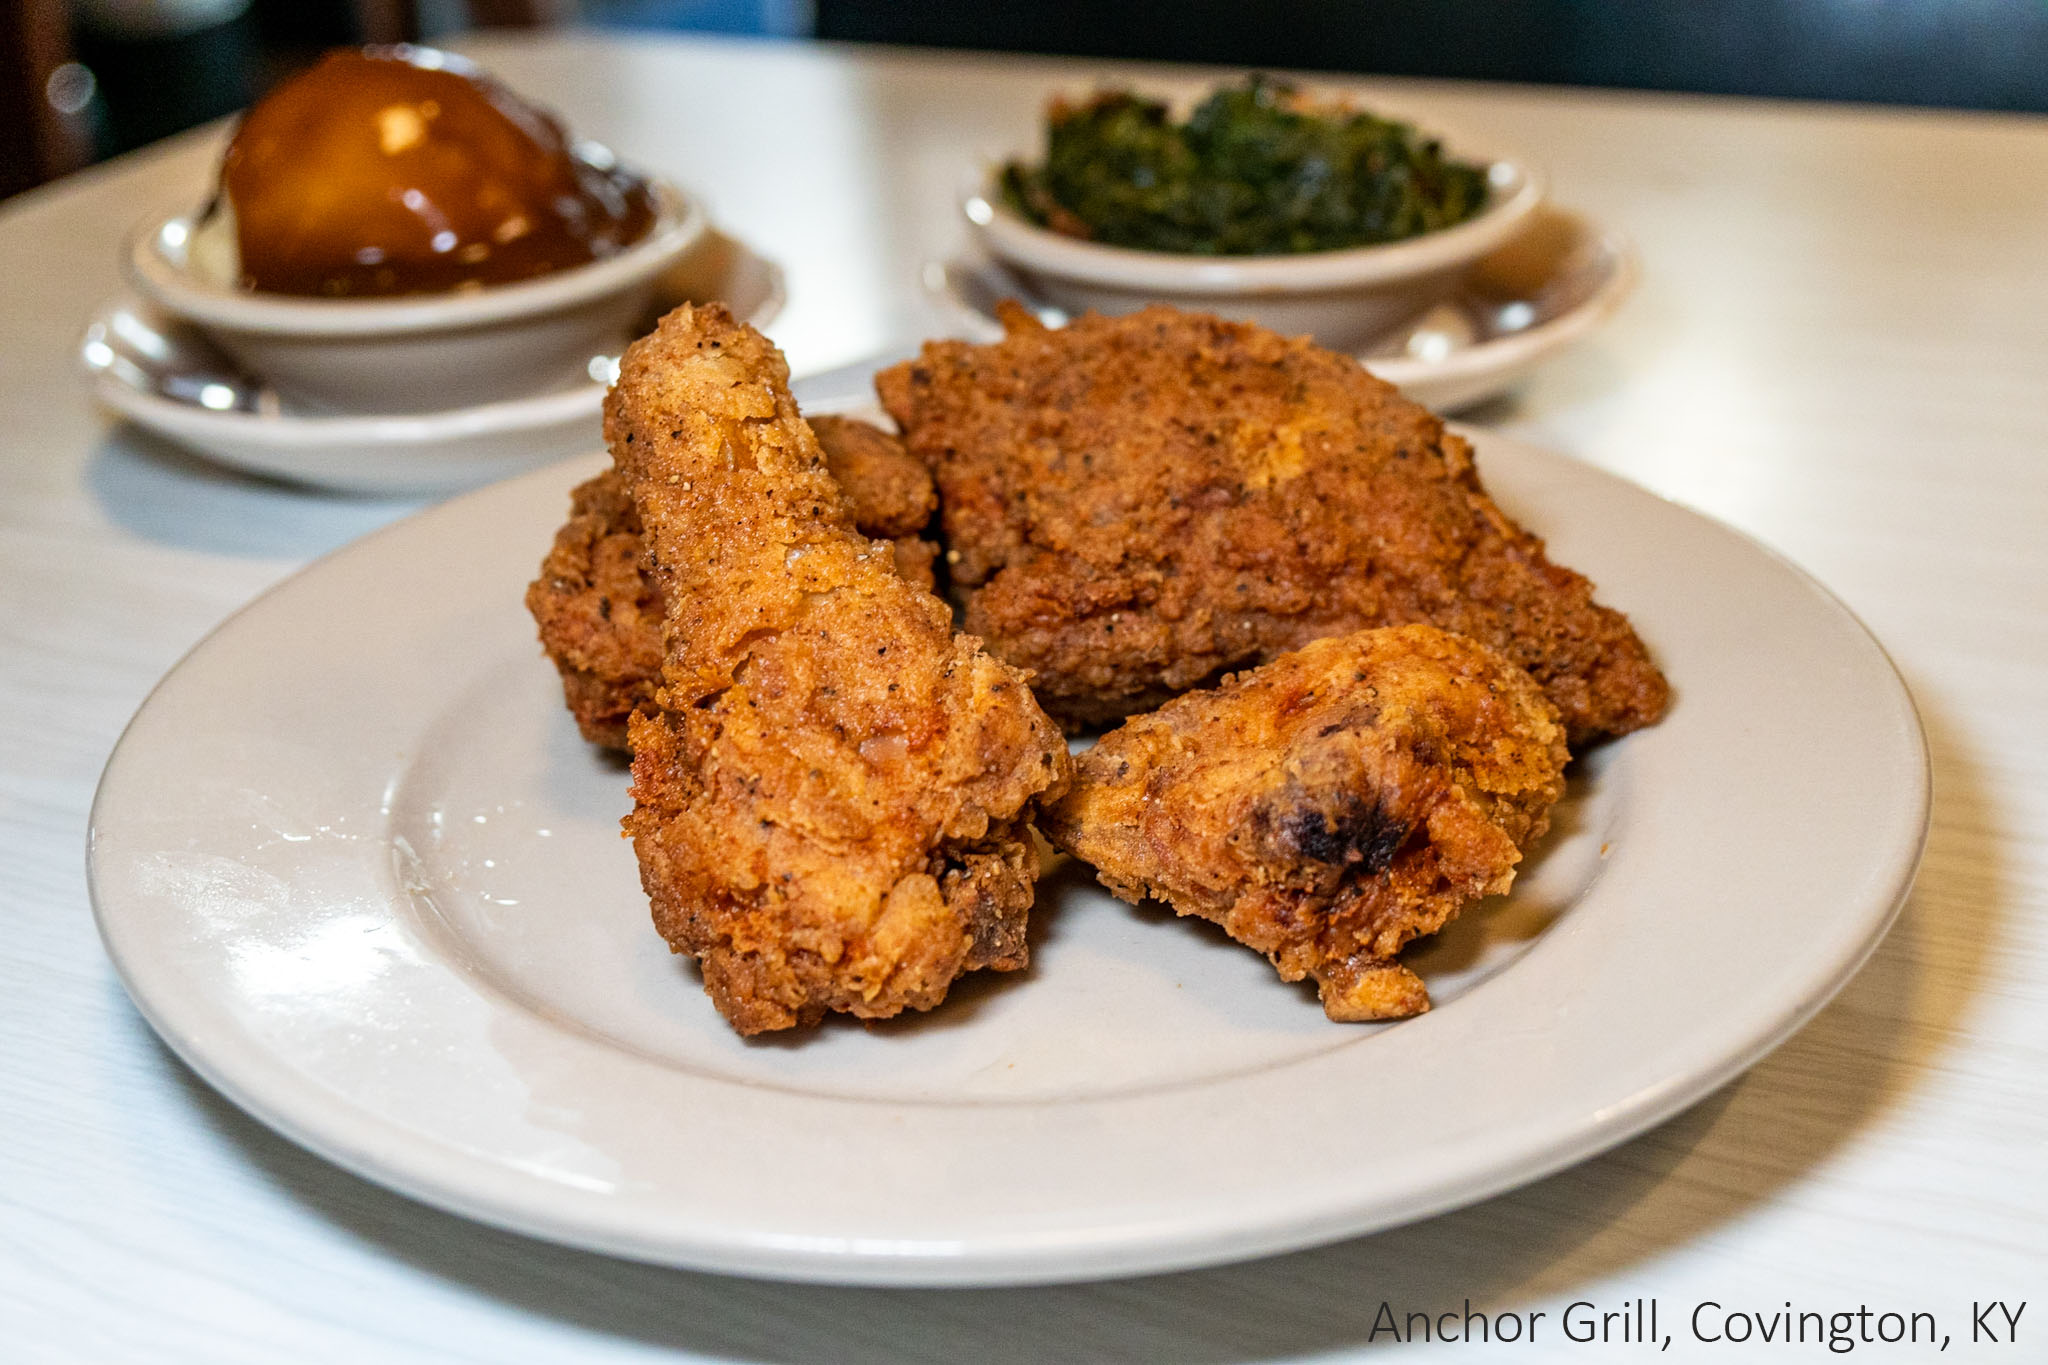 Fried Chicken, Anchor Grill